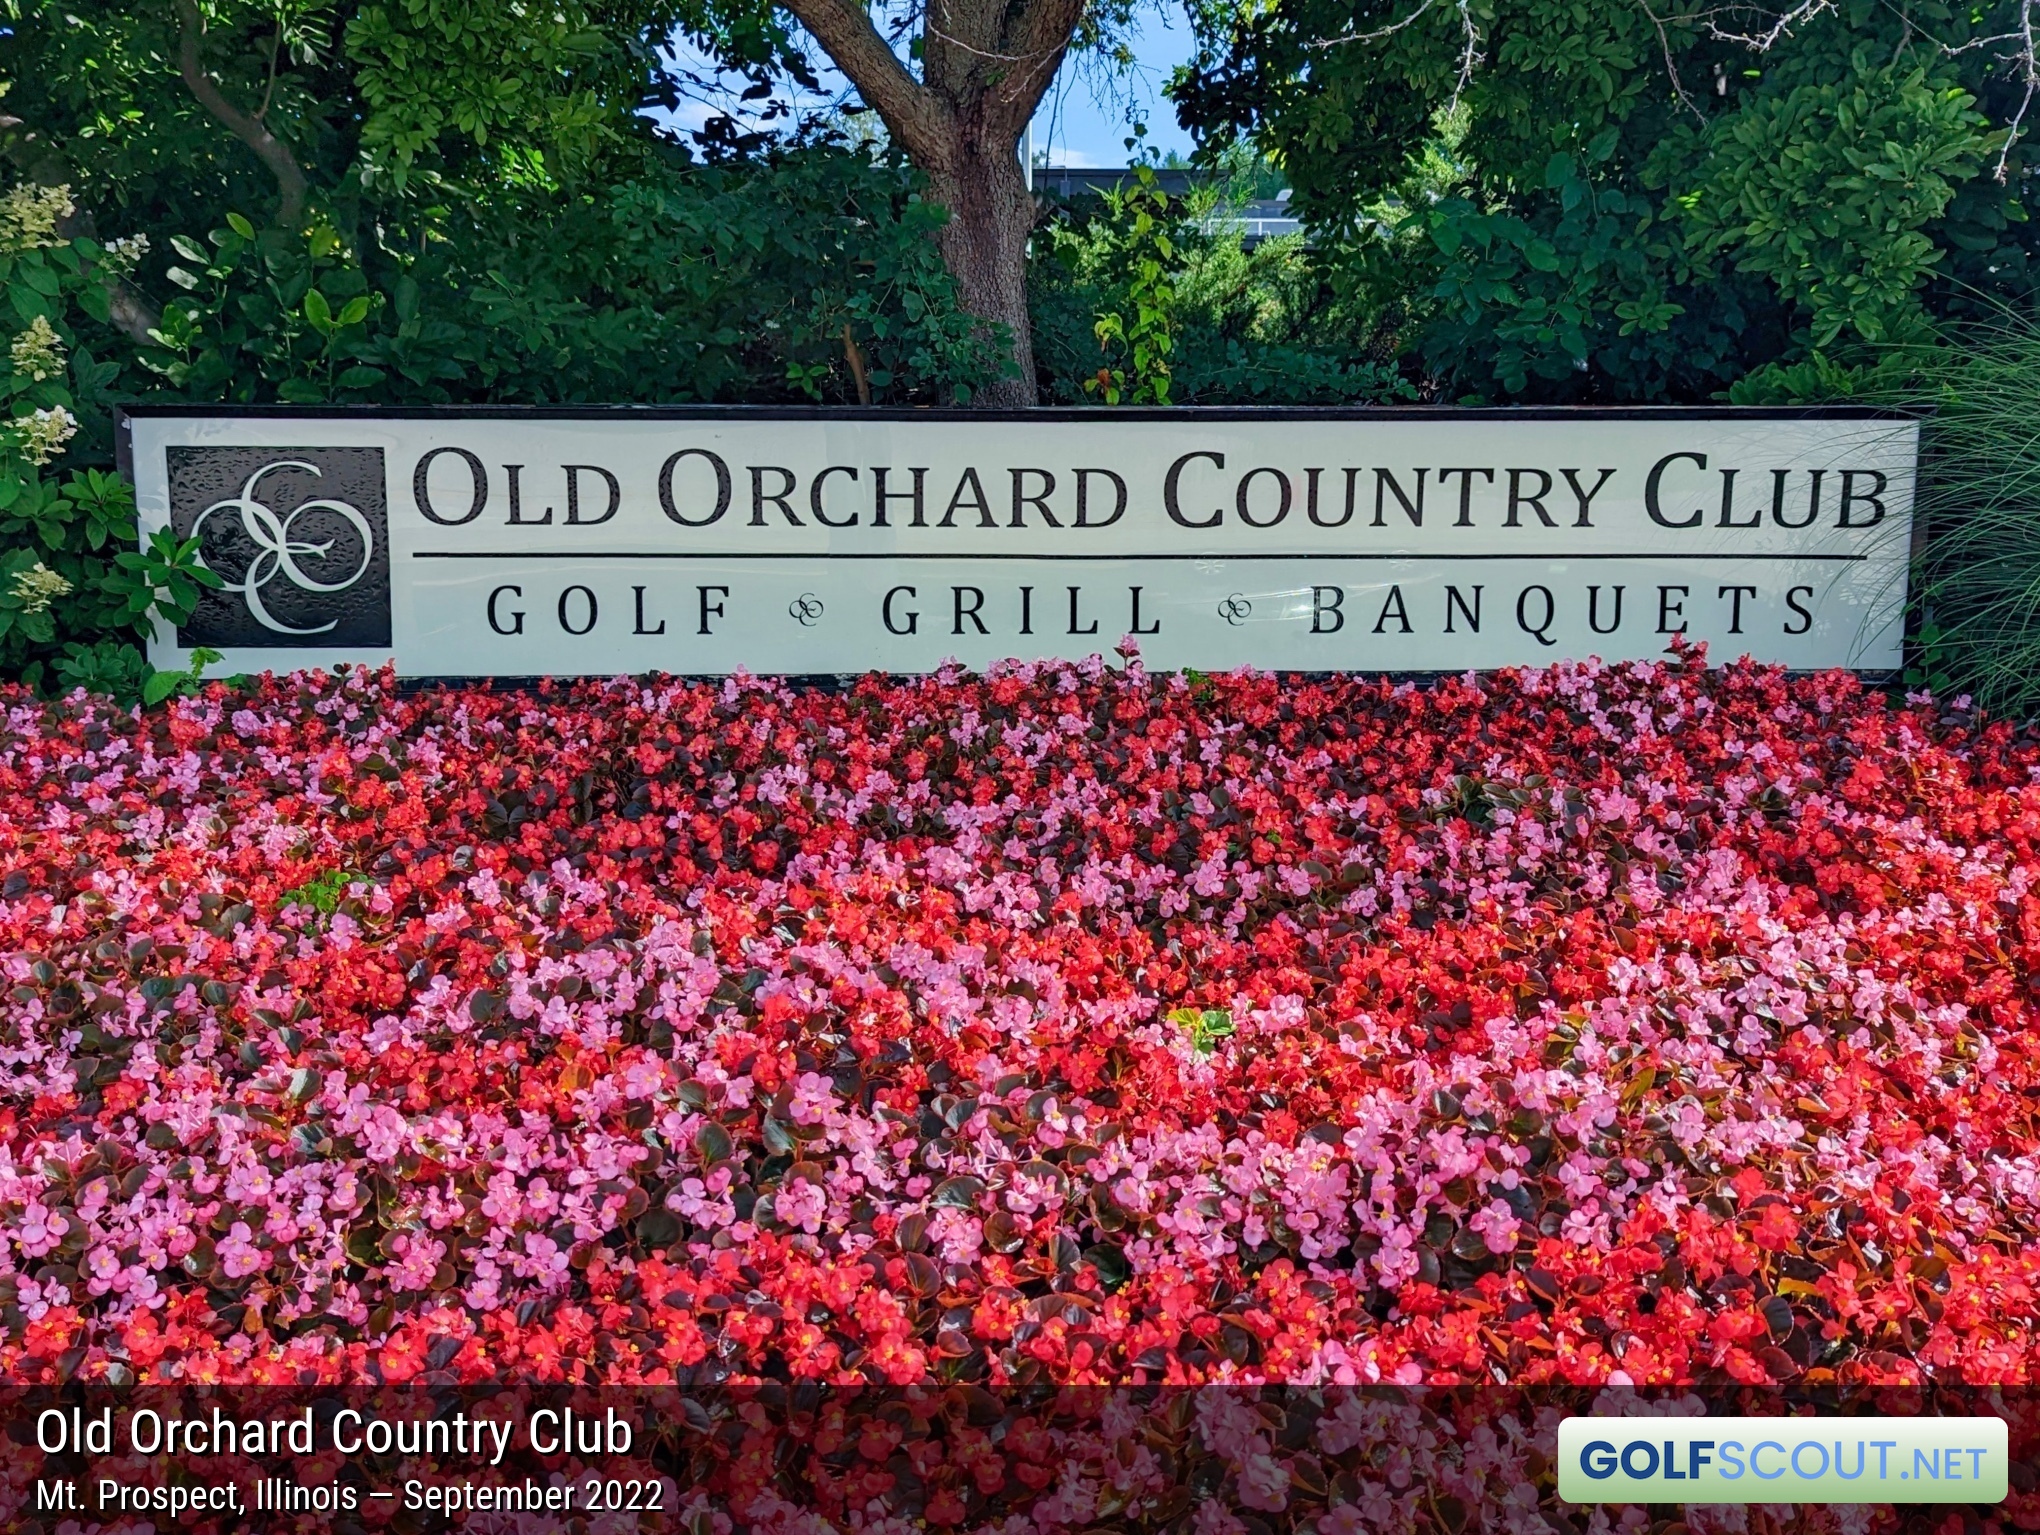 Sign at the entrance to Old Orchard Country Club